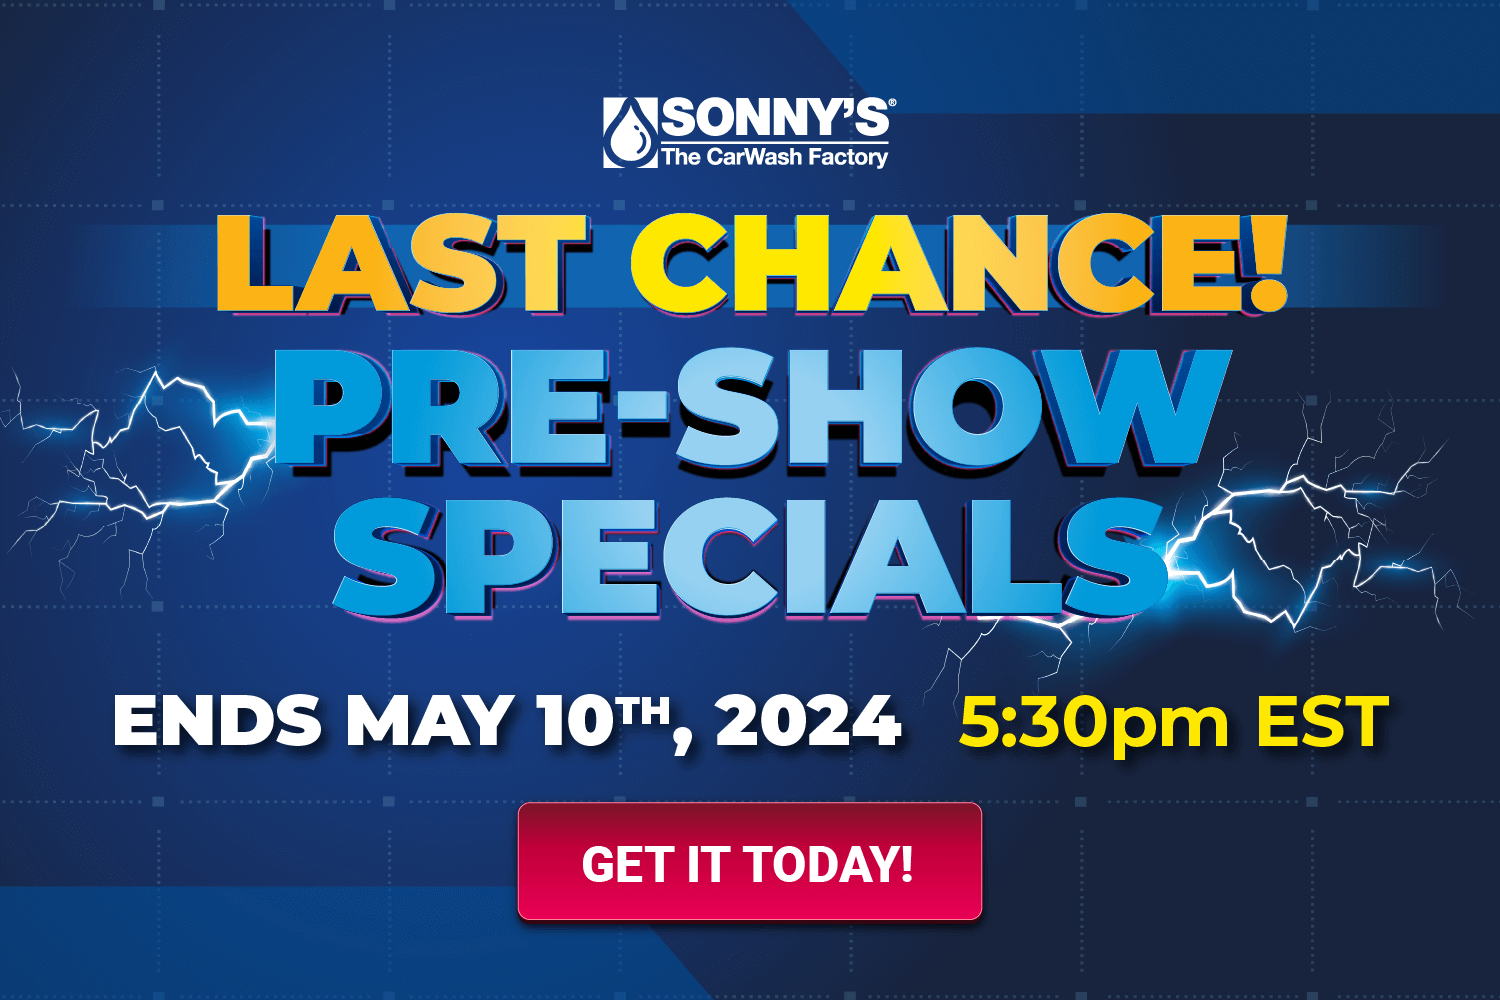 LAST CHANCE. Sonny's Pre-Show Specials. No Cap. No Kidding! Ends May 10th at 5:30pm